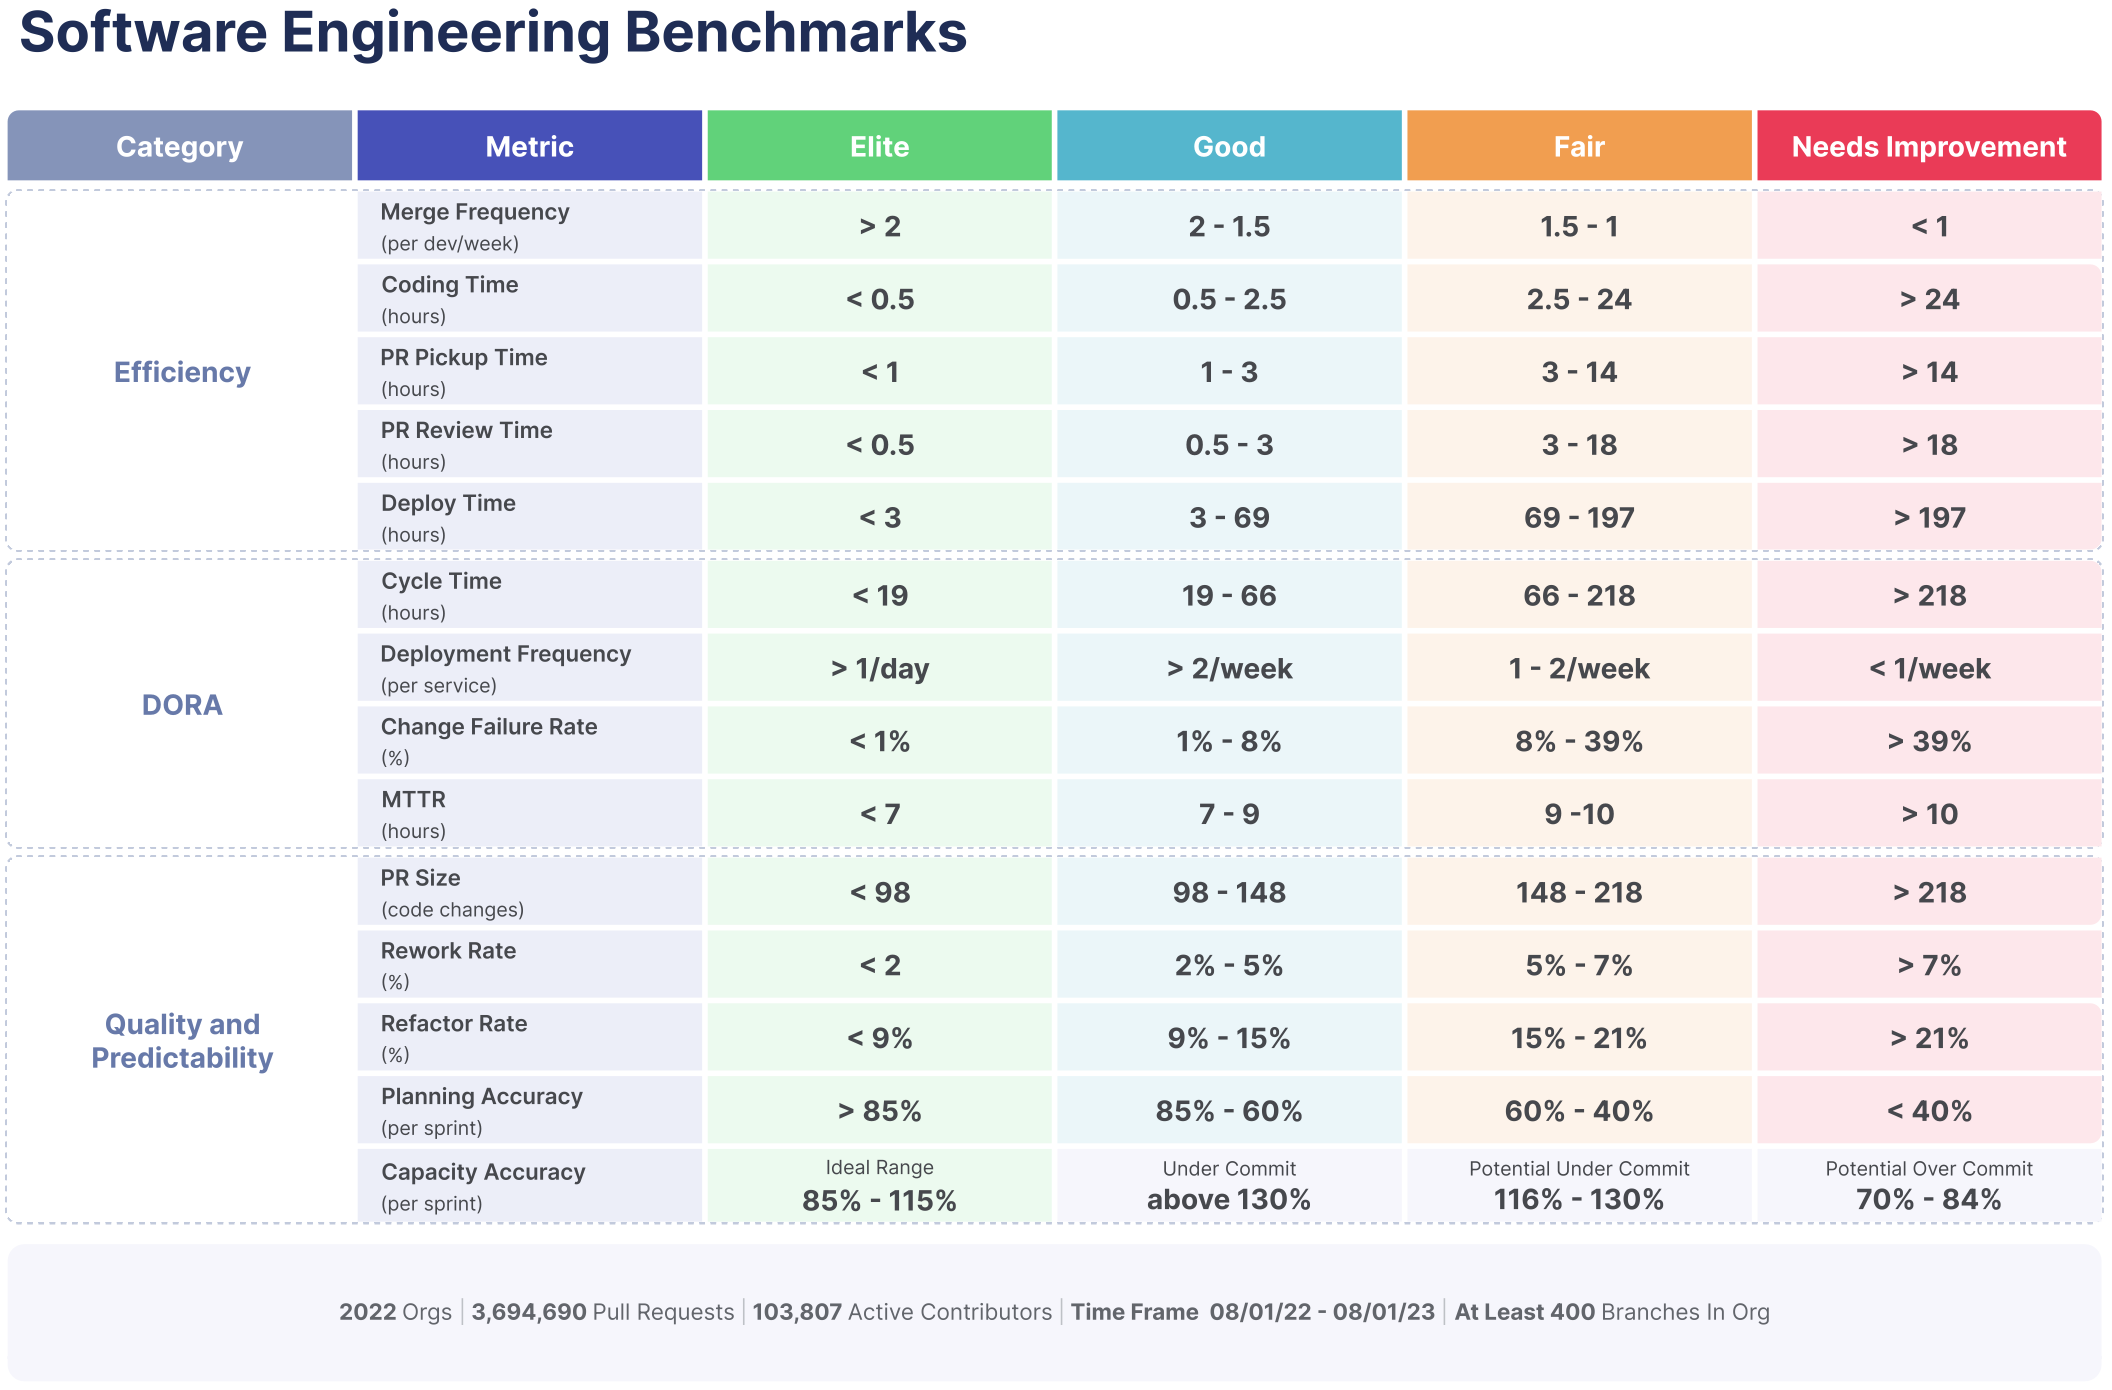 2023 software engineering benchmarks by LinearB